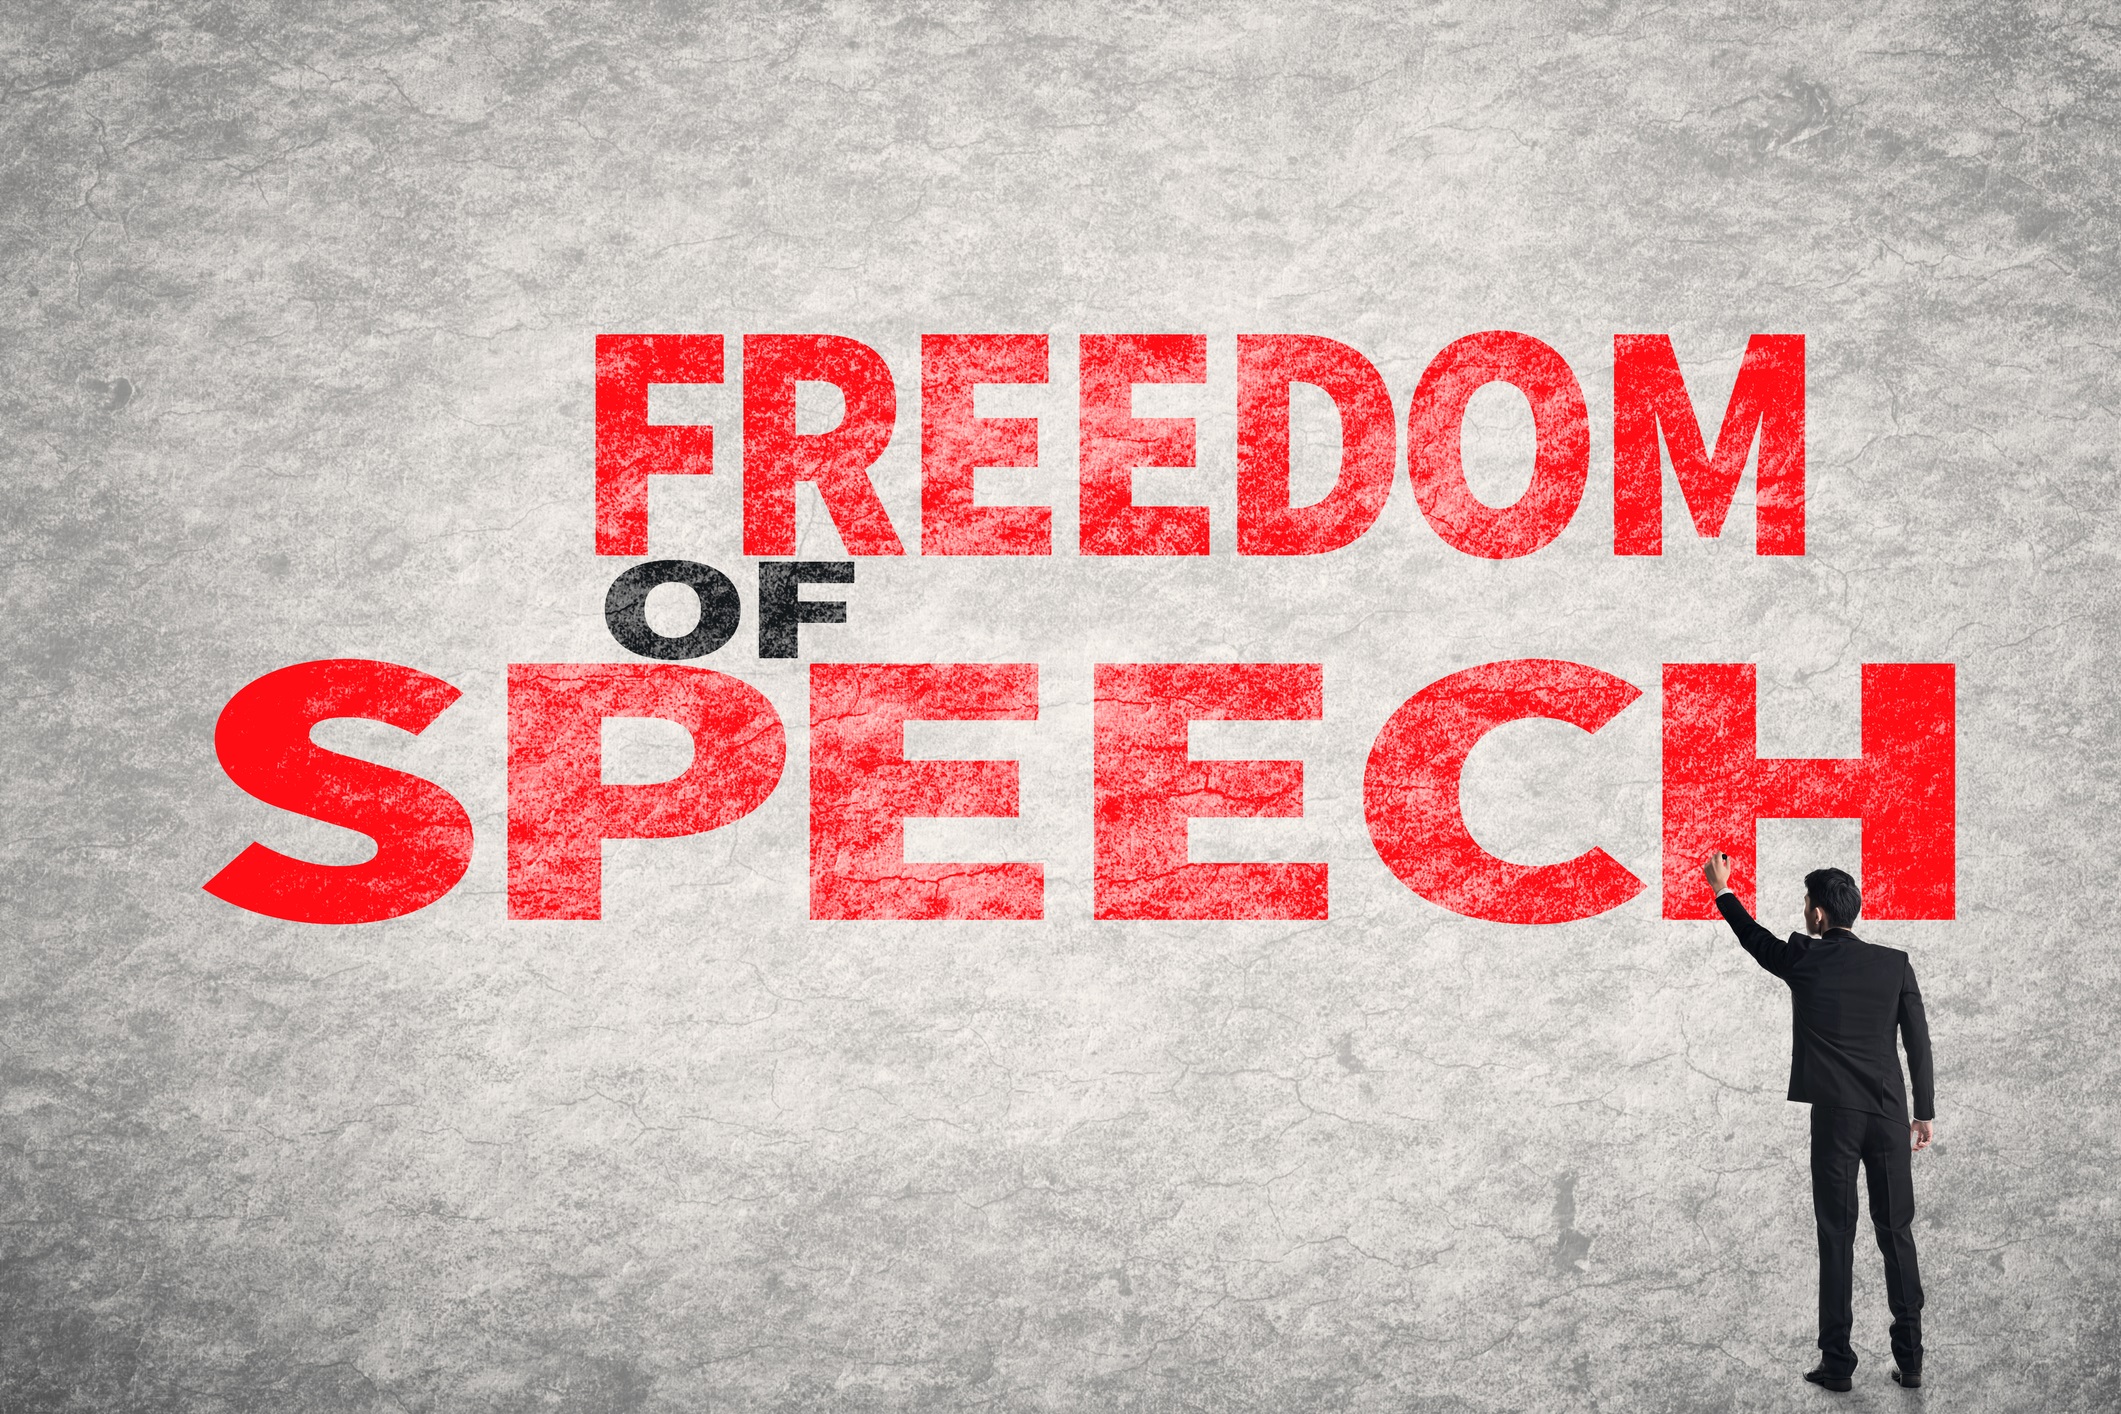 why is it important for freedom of speech